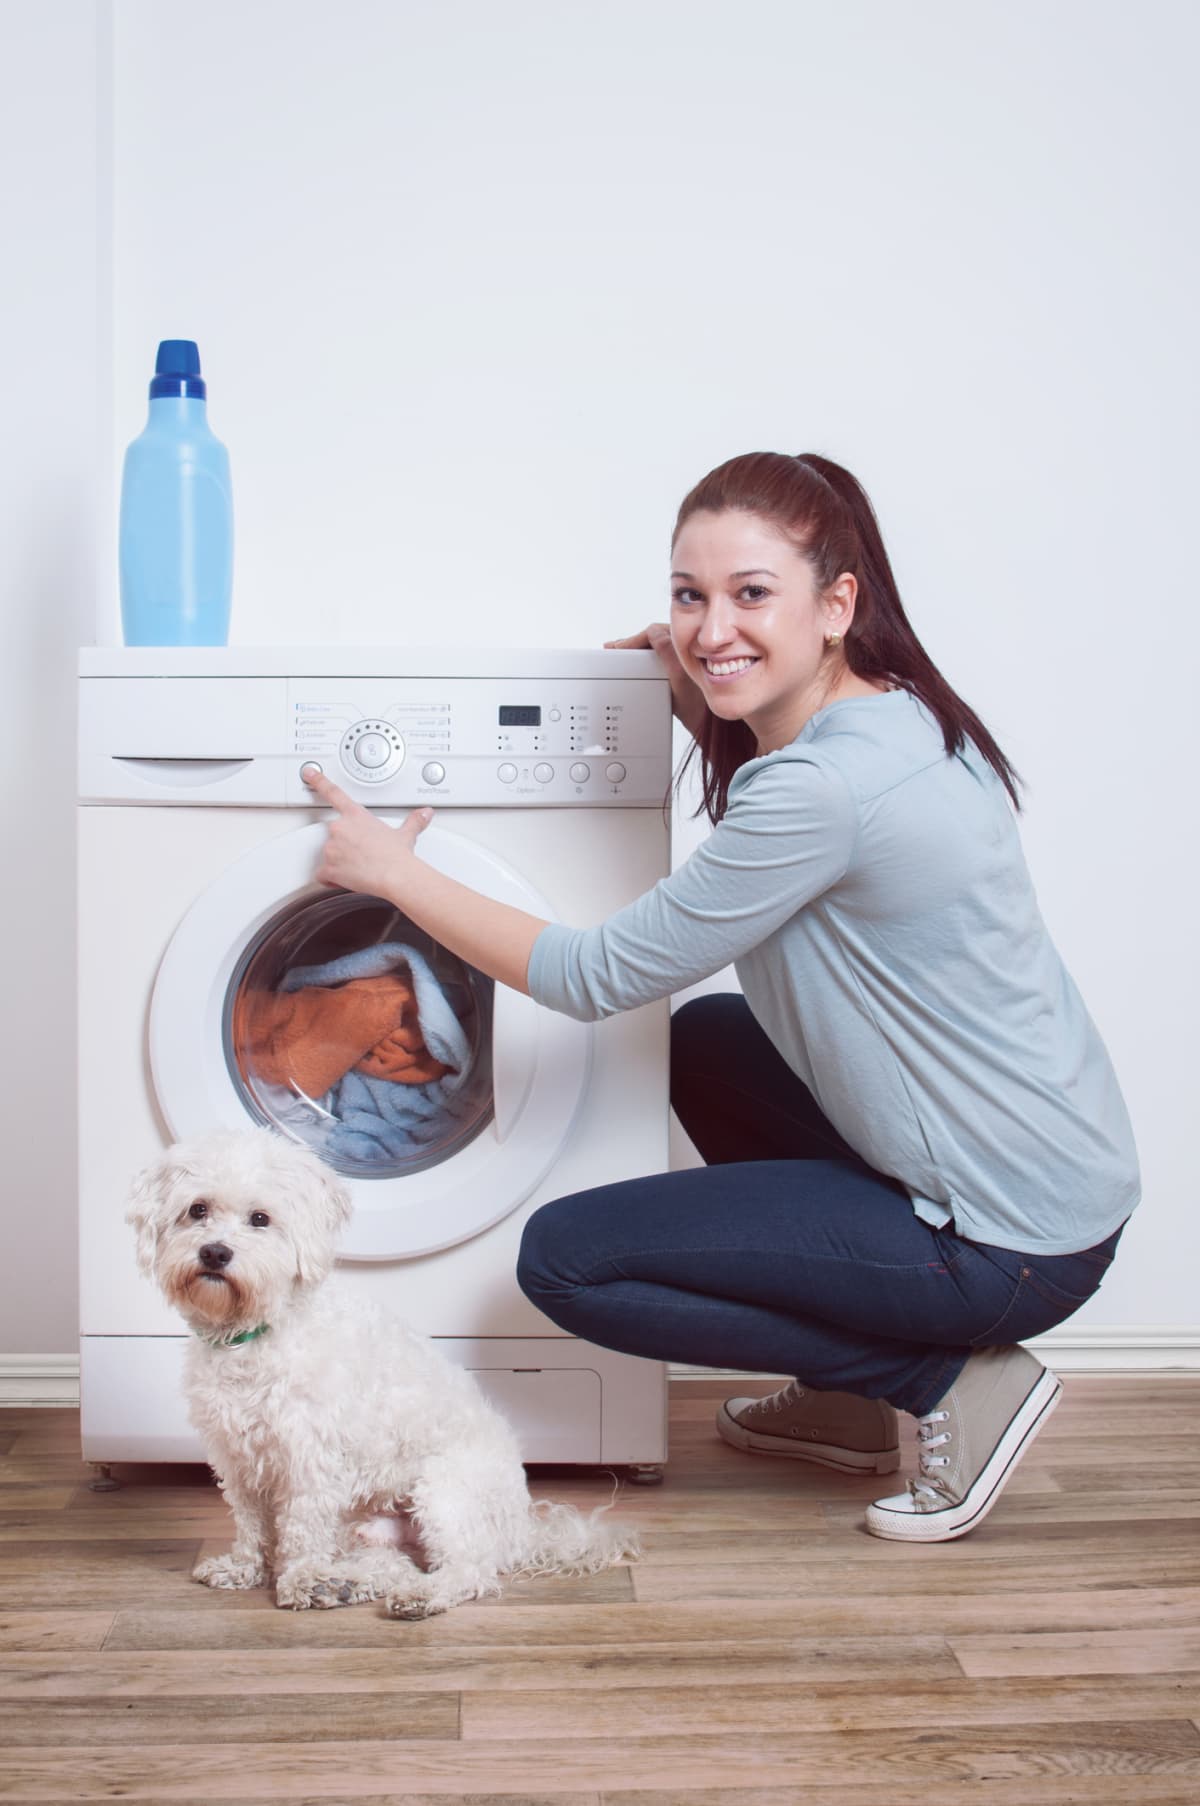 A woman using a washer and dryer with her dog sitting beside her.